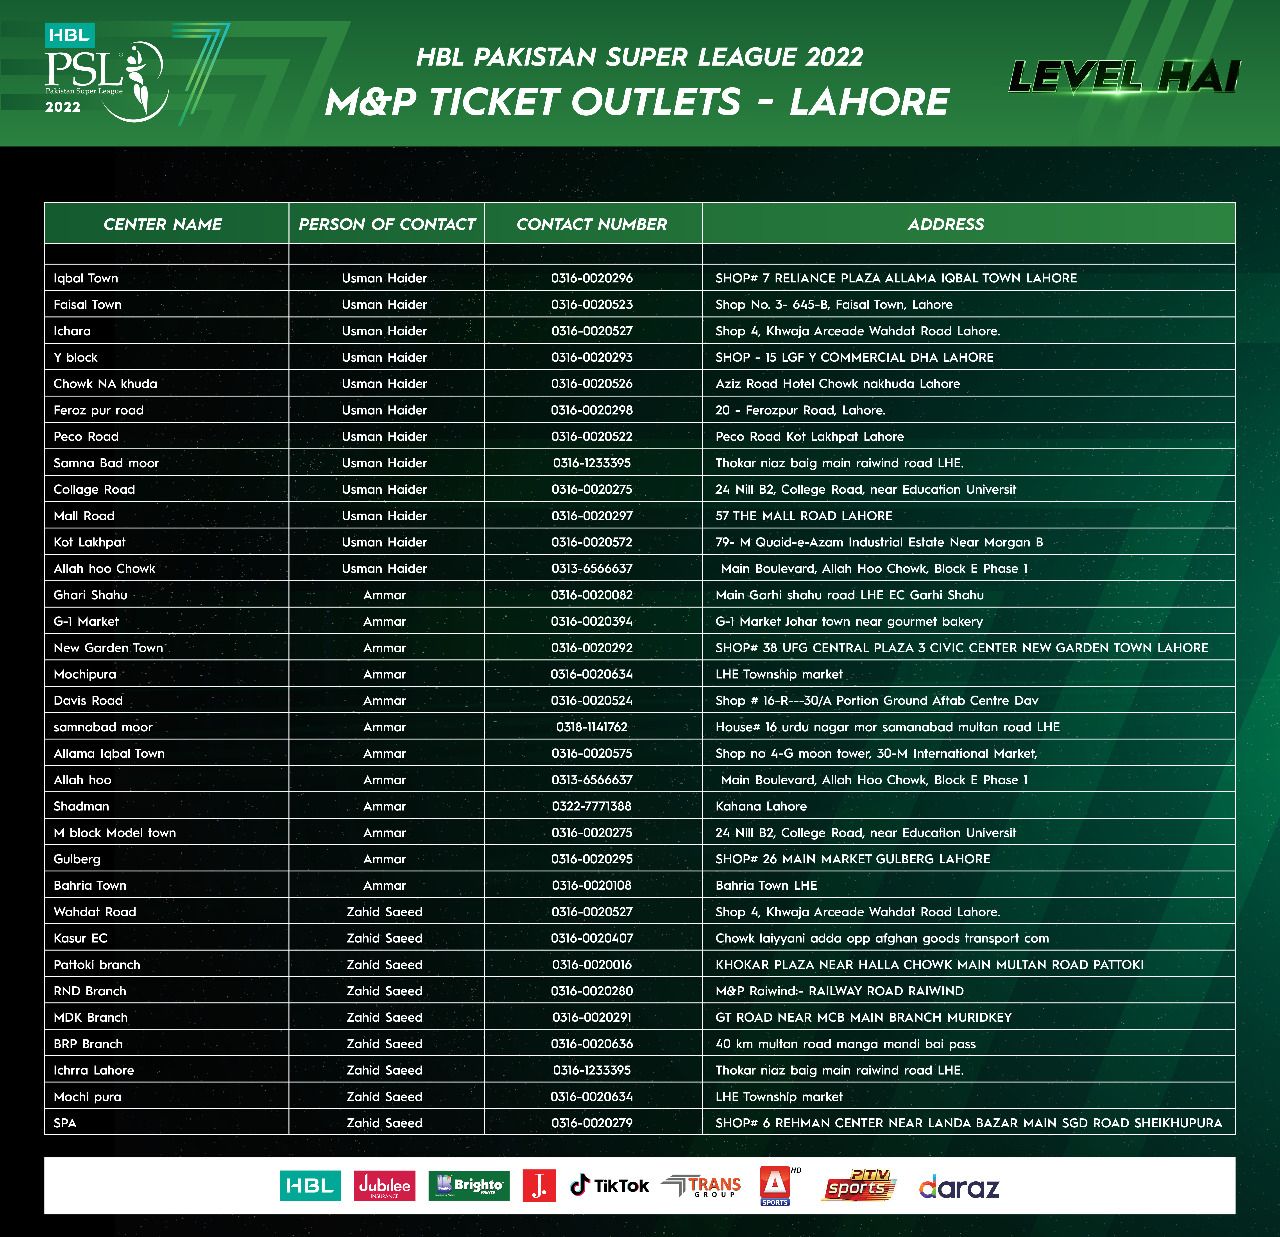 HBL PSL 2022 tickets are also available at MandP stores now Press Release PCB